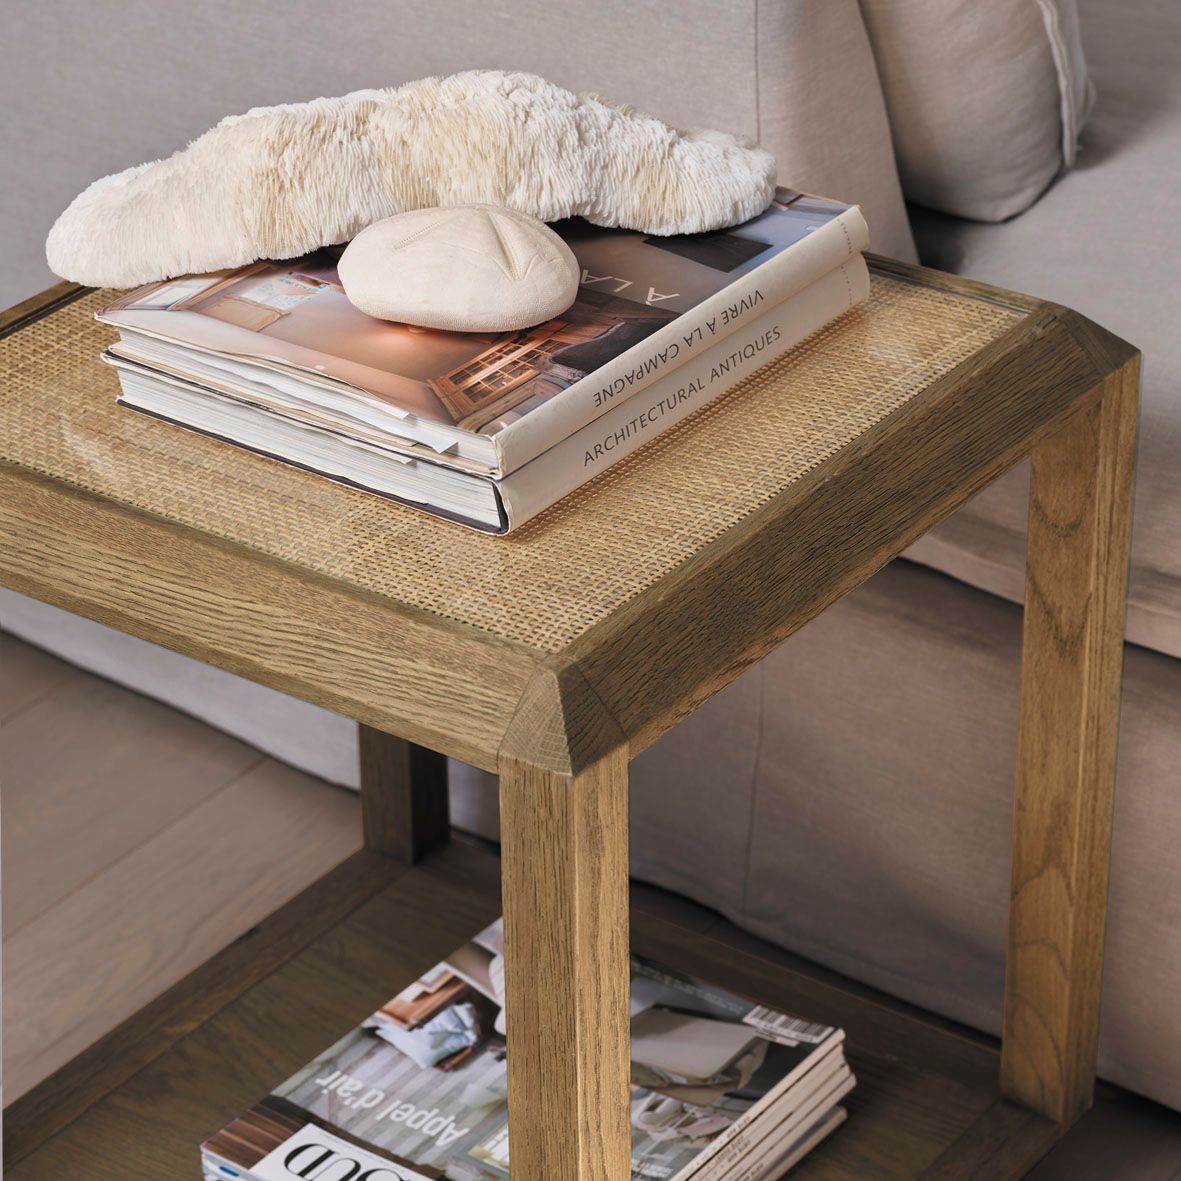 Ema side table